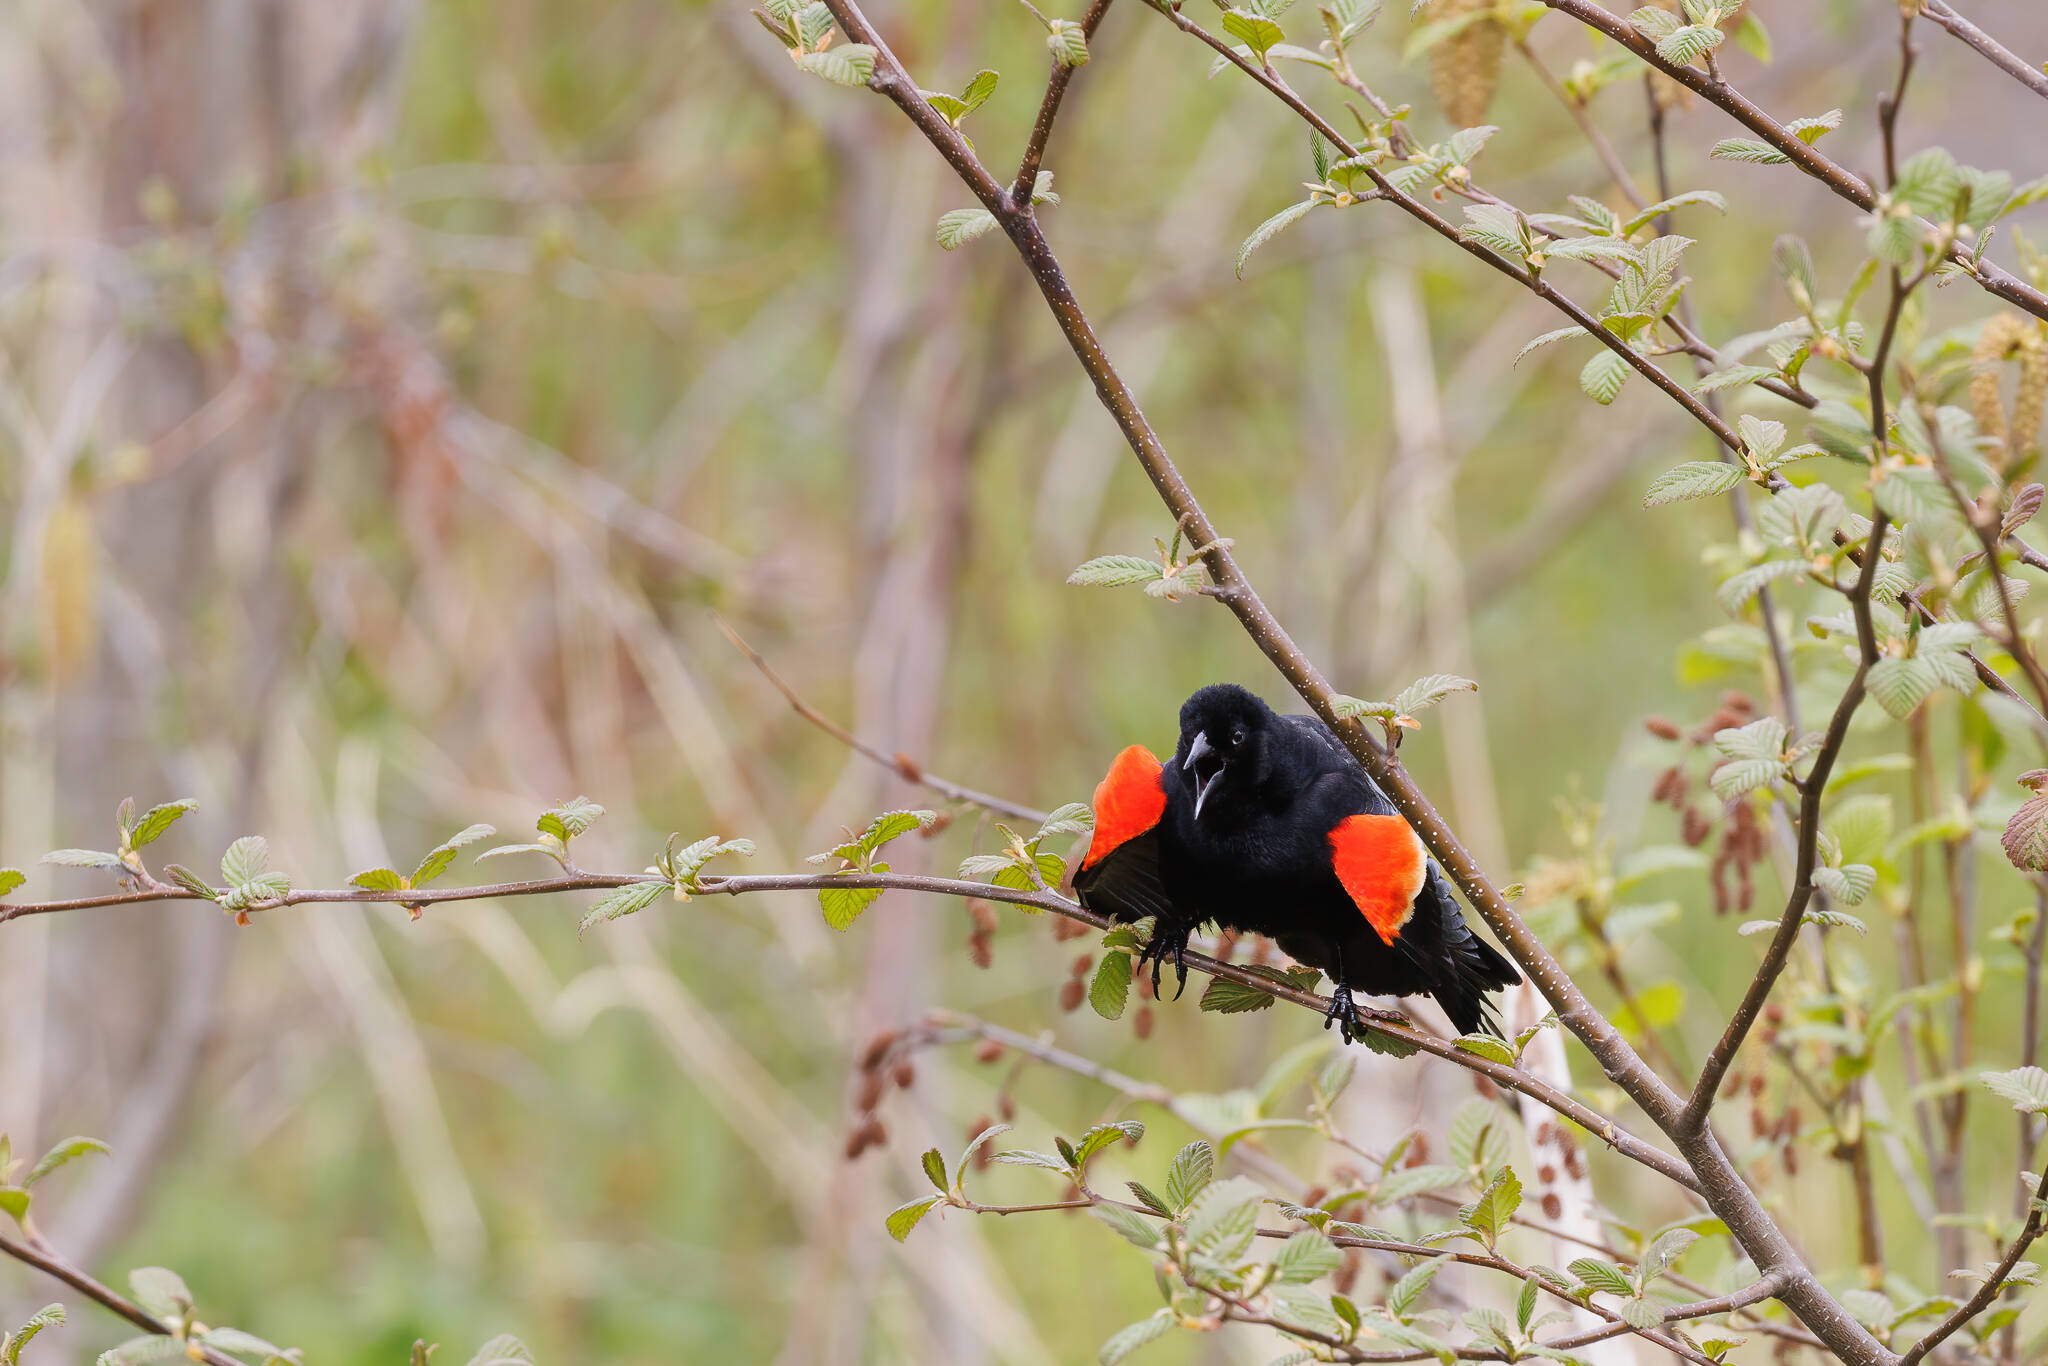 A male red-winged blackbird displays his showy red patches and calls to a rival male. (Courtesy Photo / Gina Vose)